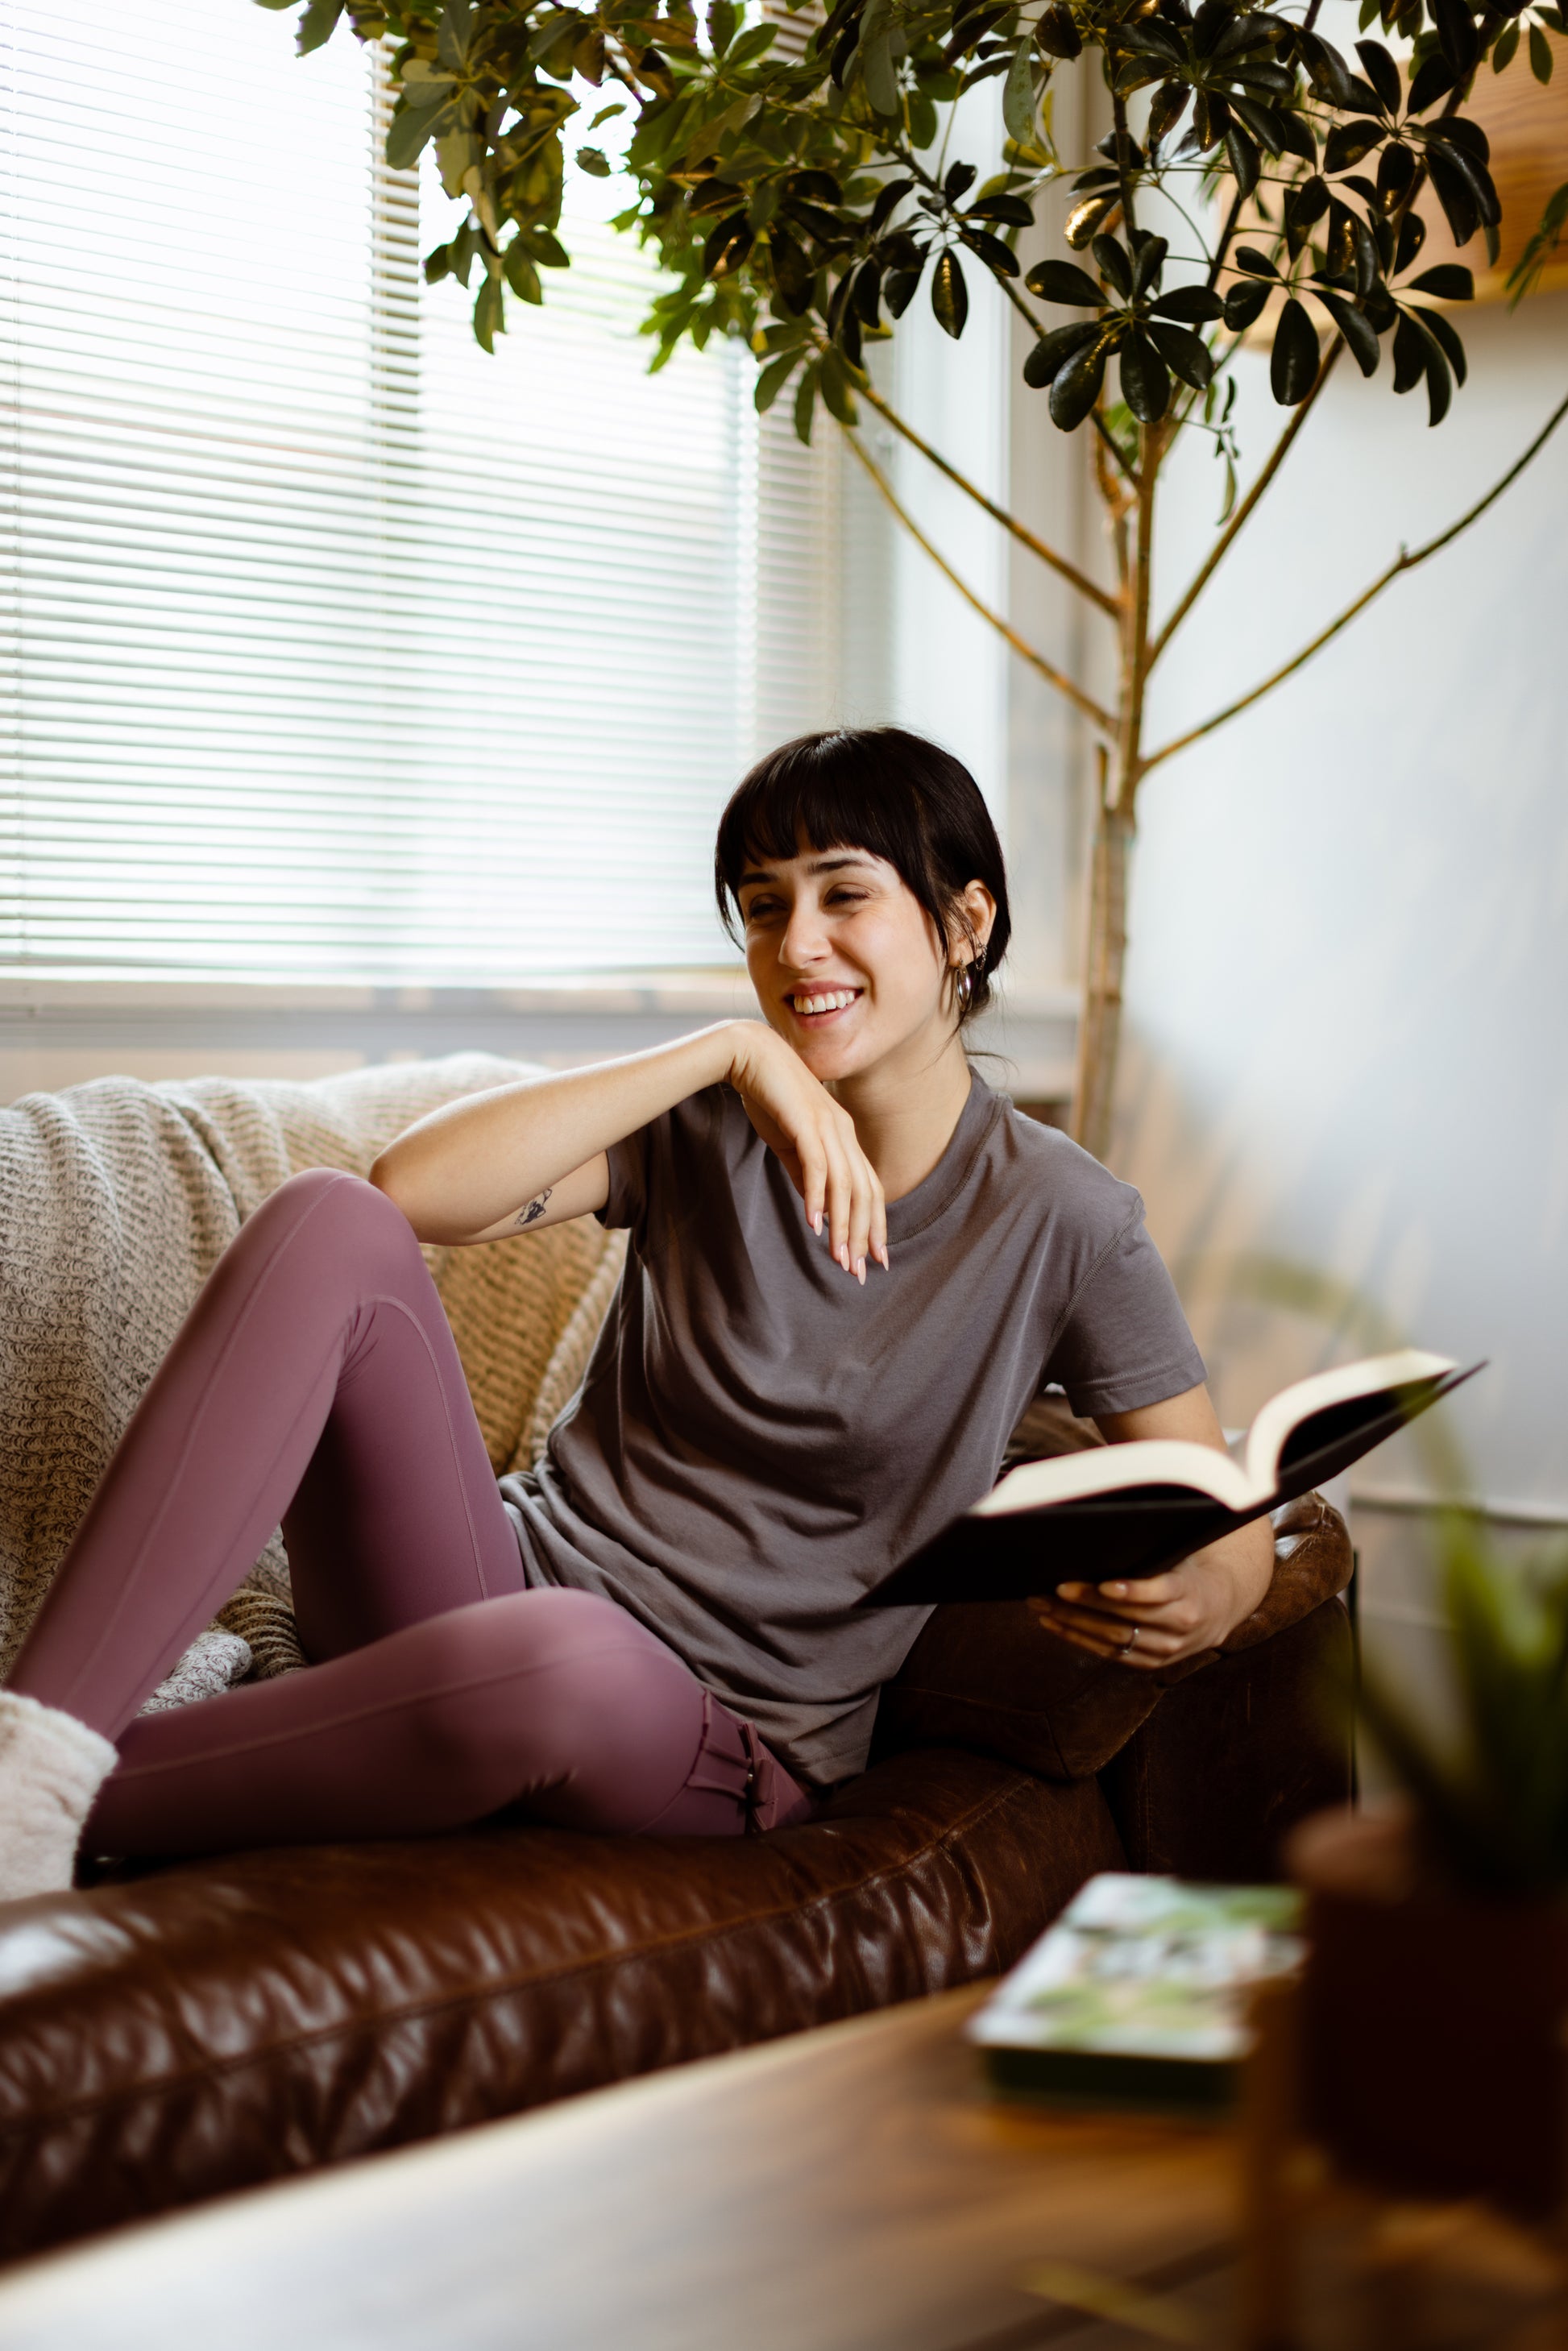 Sophia (A woman with long black hair) wears the No Limbits Adaptive Women's Charcoal Sensory Tee. She lays on a couch, holding a book.